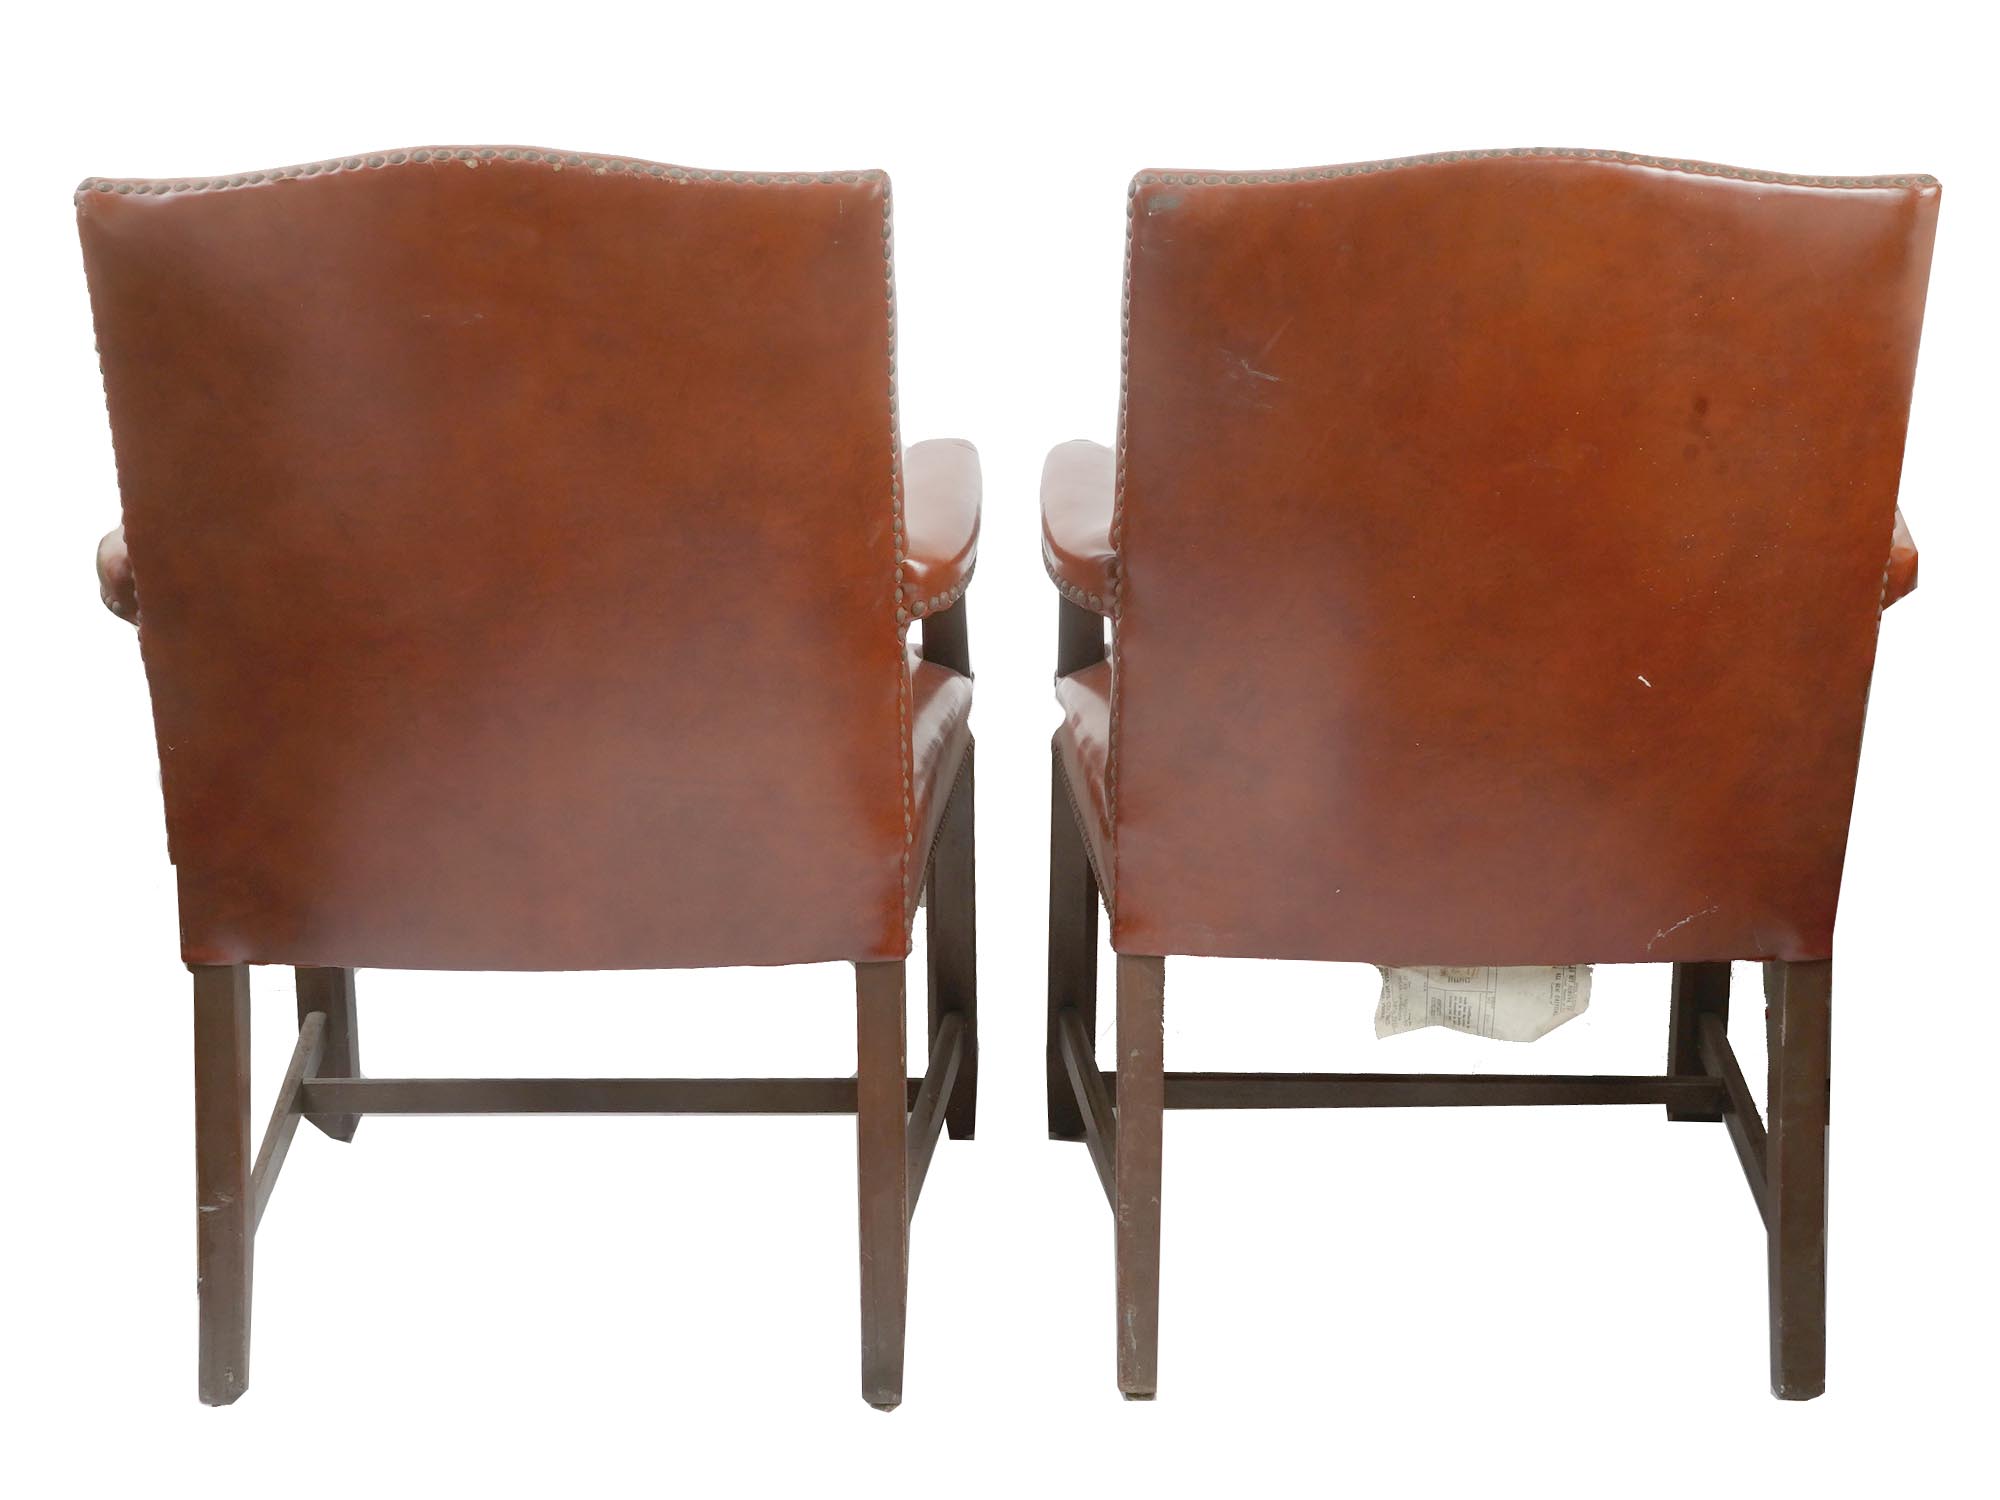 PAIR OF VINTAGE WOODEN ARMCHAIRS IN LEATHER PIC-3